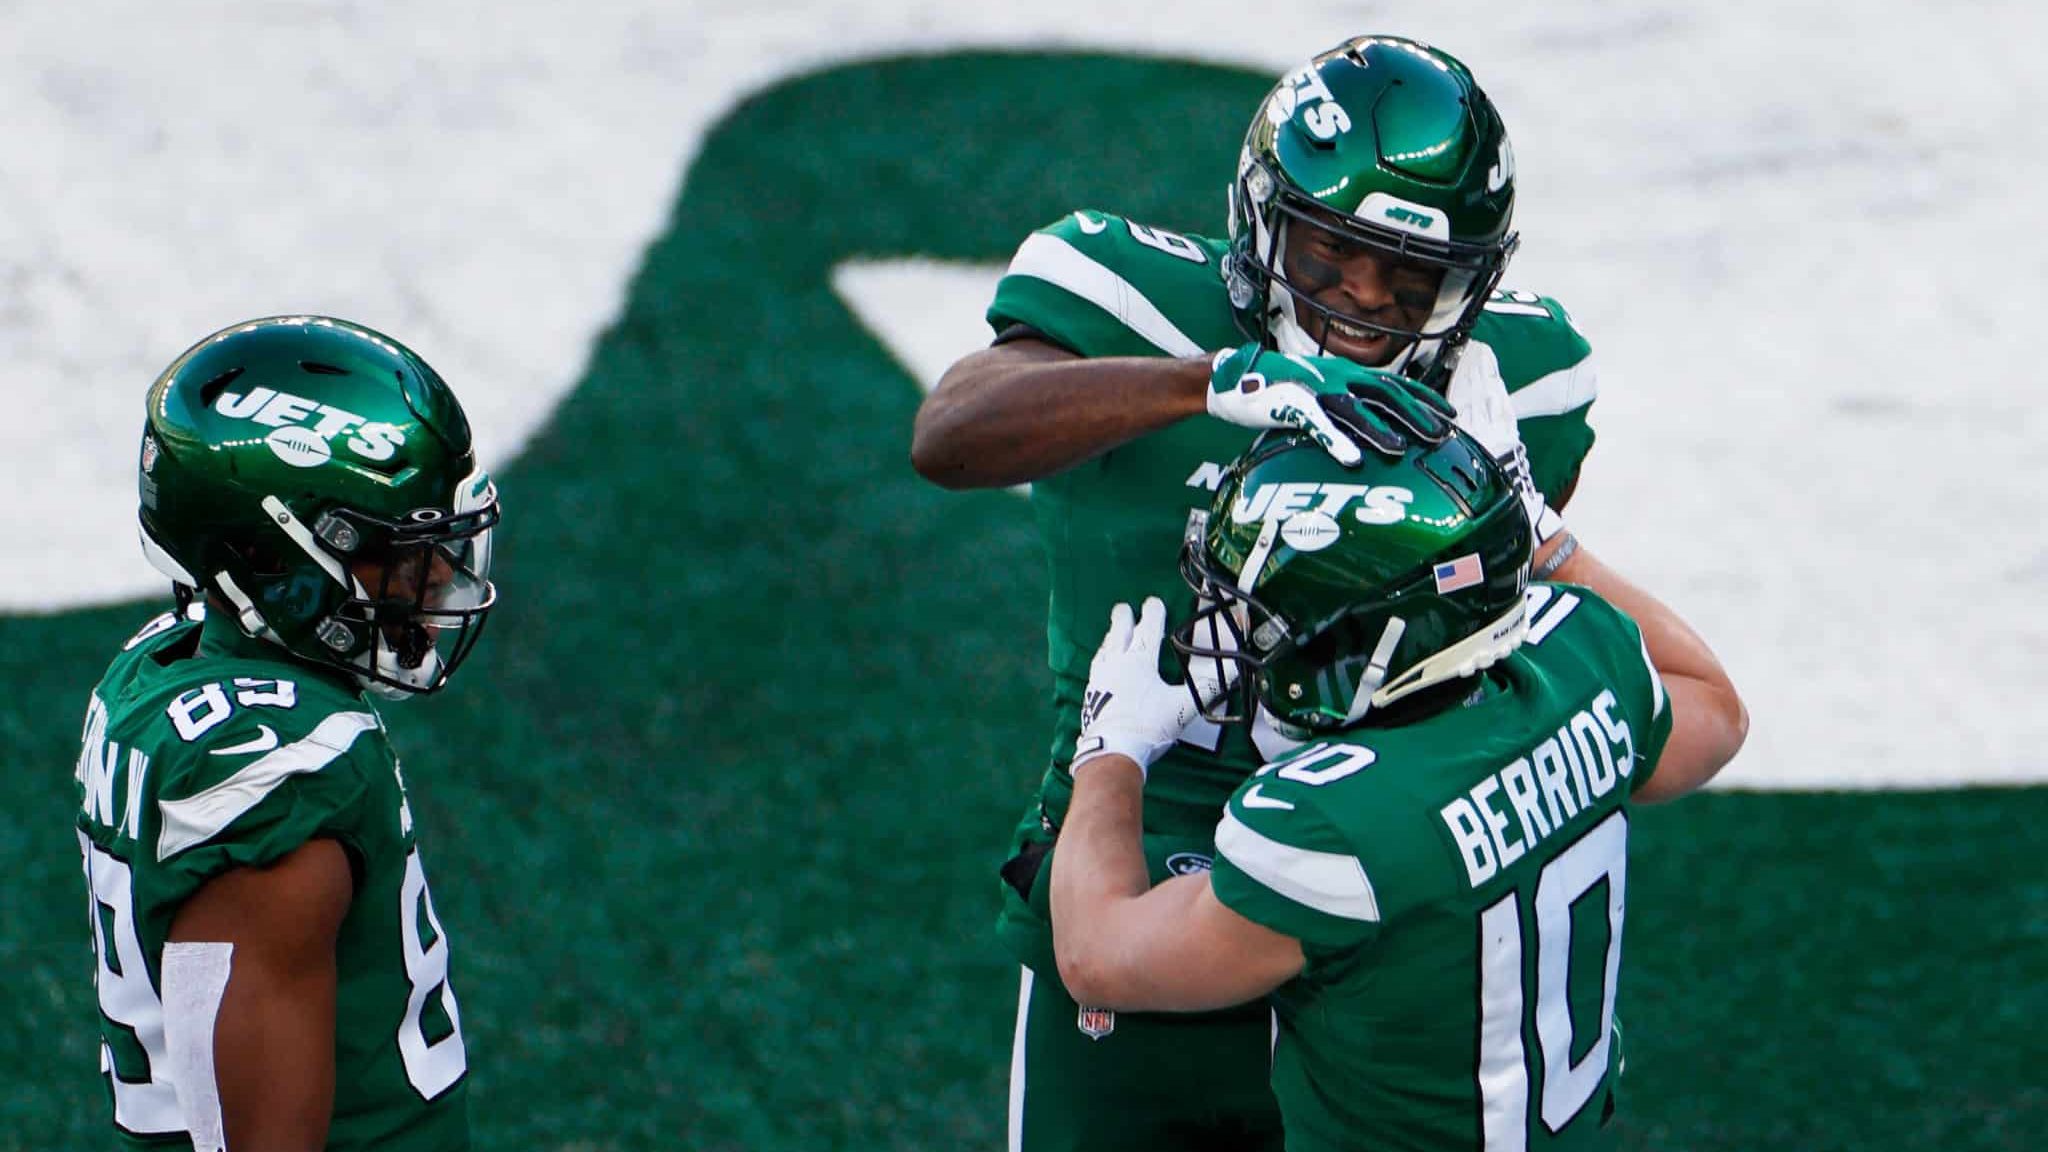 EAST RUTHERFORD, NEW JERSEY - DECEMBER 27: Braxton Berrios #10 of the New York Jets celebrates his touchdown with Breshad Perriman #19 and Trevon Wesco #85 in the first quarter against the Cleveland Browns at MetLife Stadium on December 27, 2020 in East Rutherford, New Jersey.